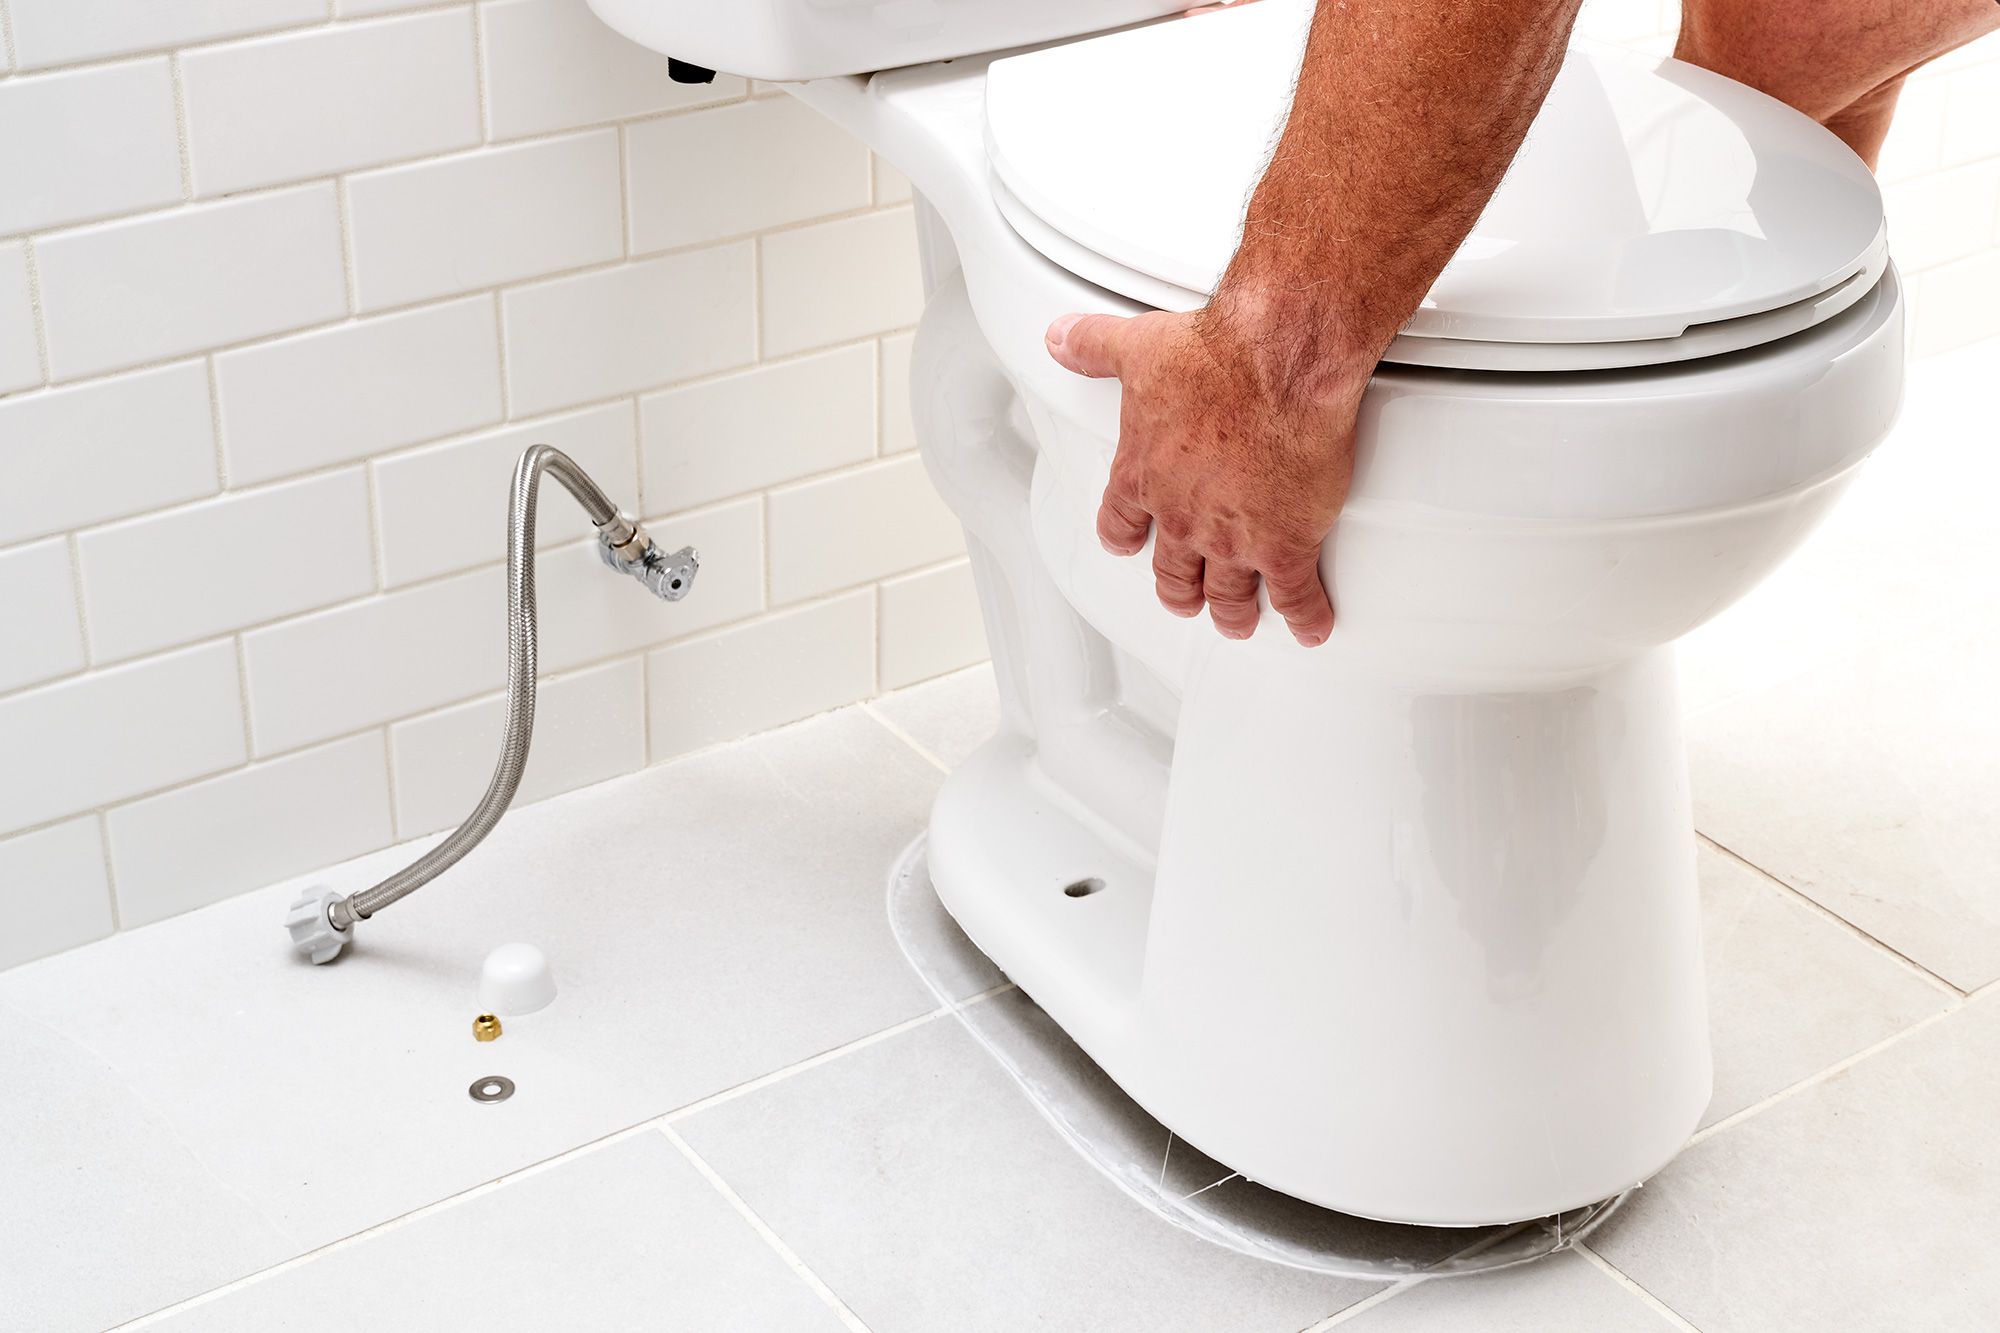 How to install a toilet?